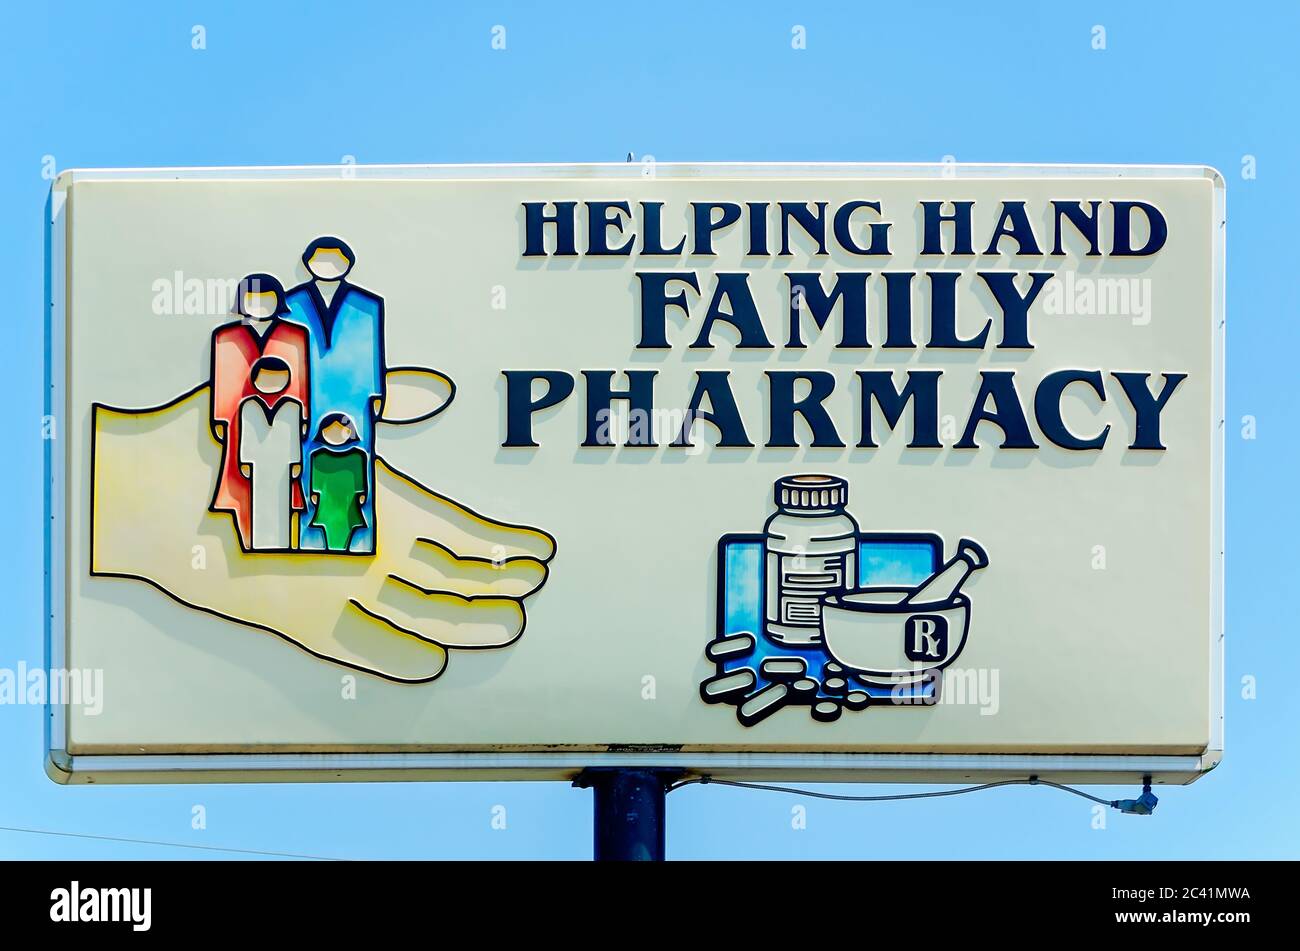 The Helping Hand Family Pharmacy sign is pictured, July 26, 2019, in Vicksburg, Mississippi. Stock Photo